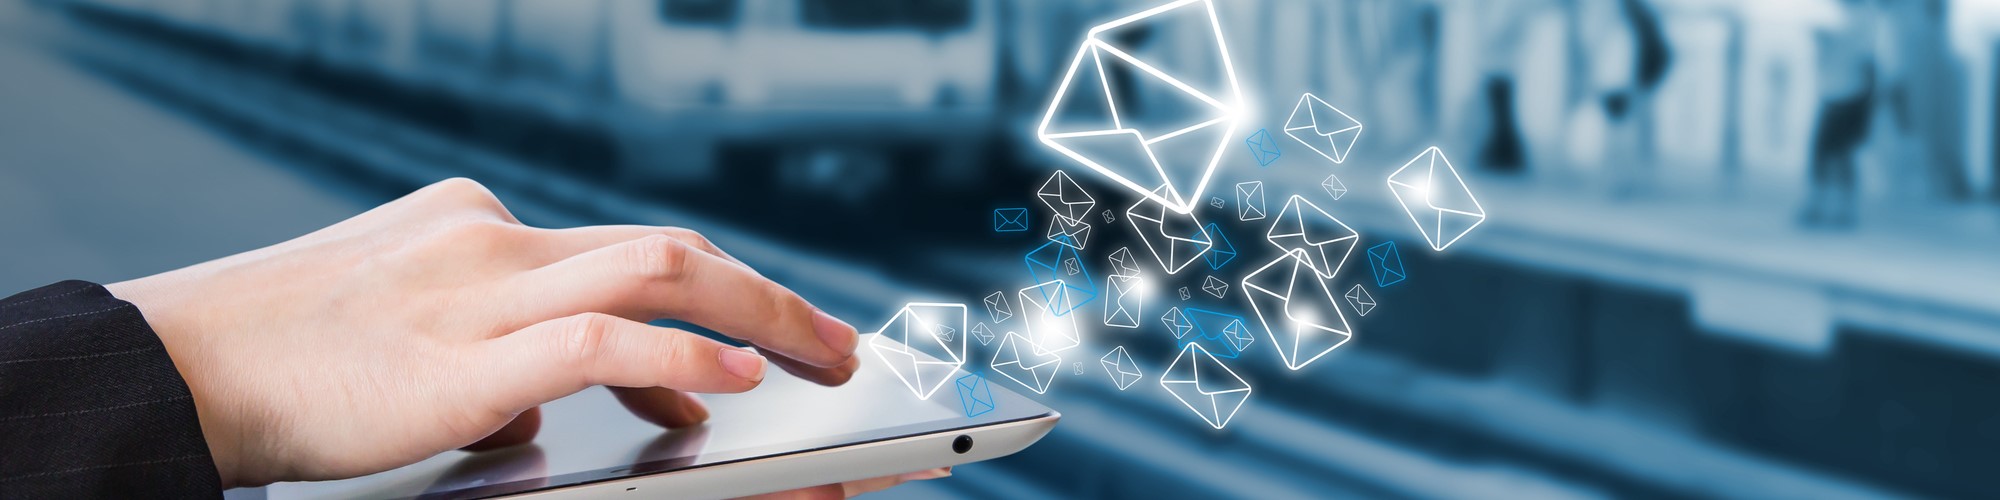 10 Free Email Marketing Tools You Should Use